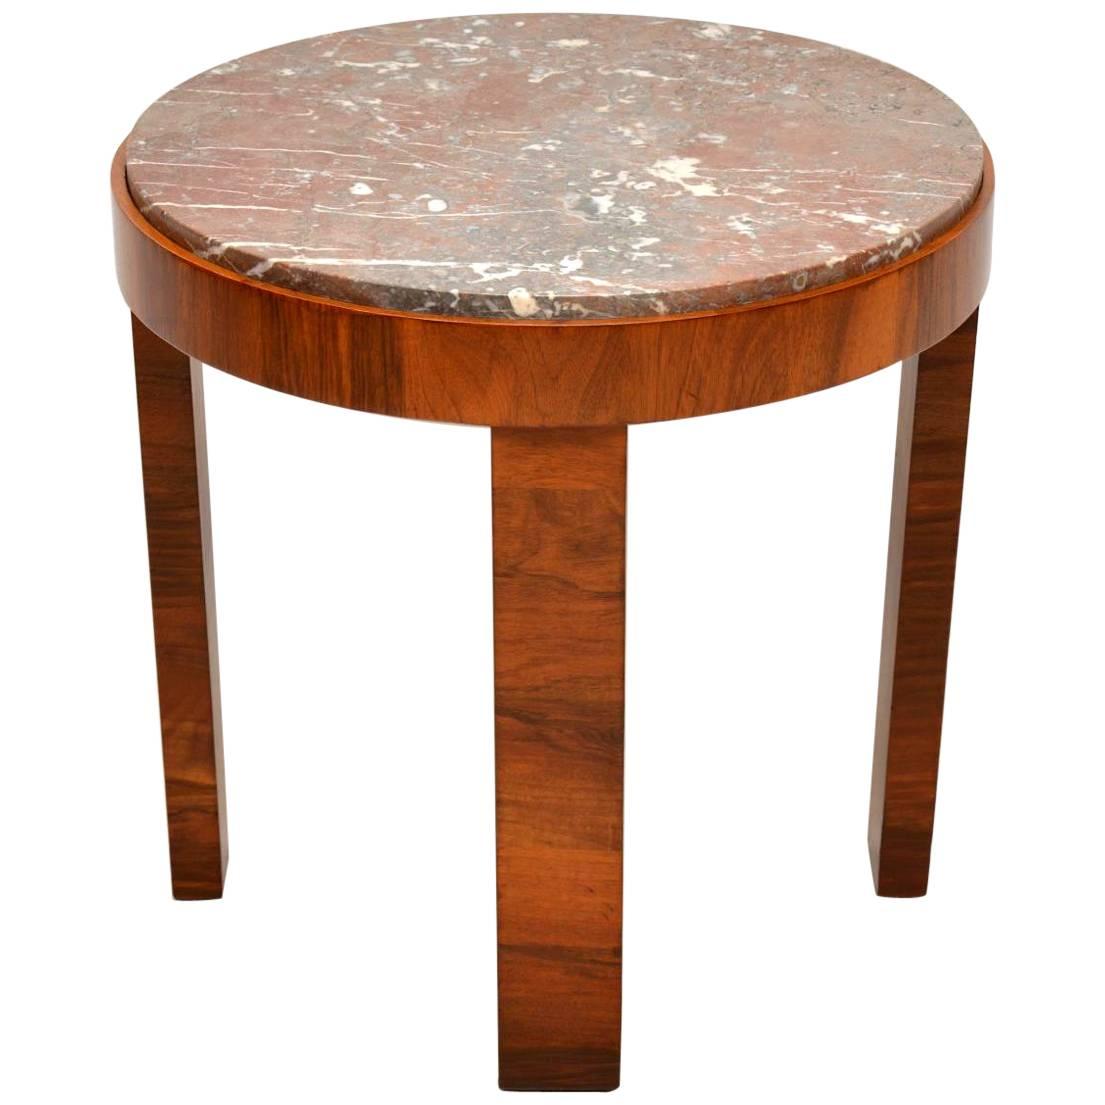 1920s Art Deco Walnut and Marble Coffee Table